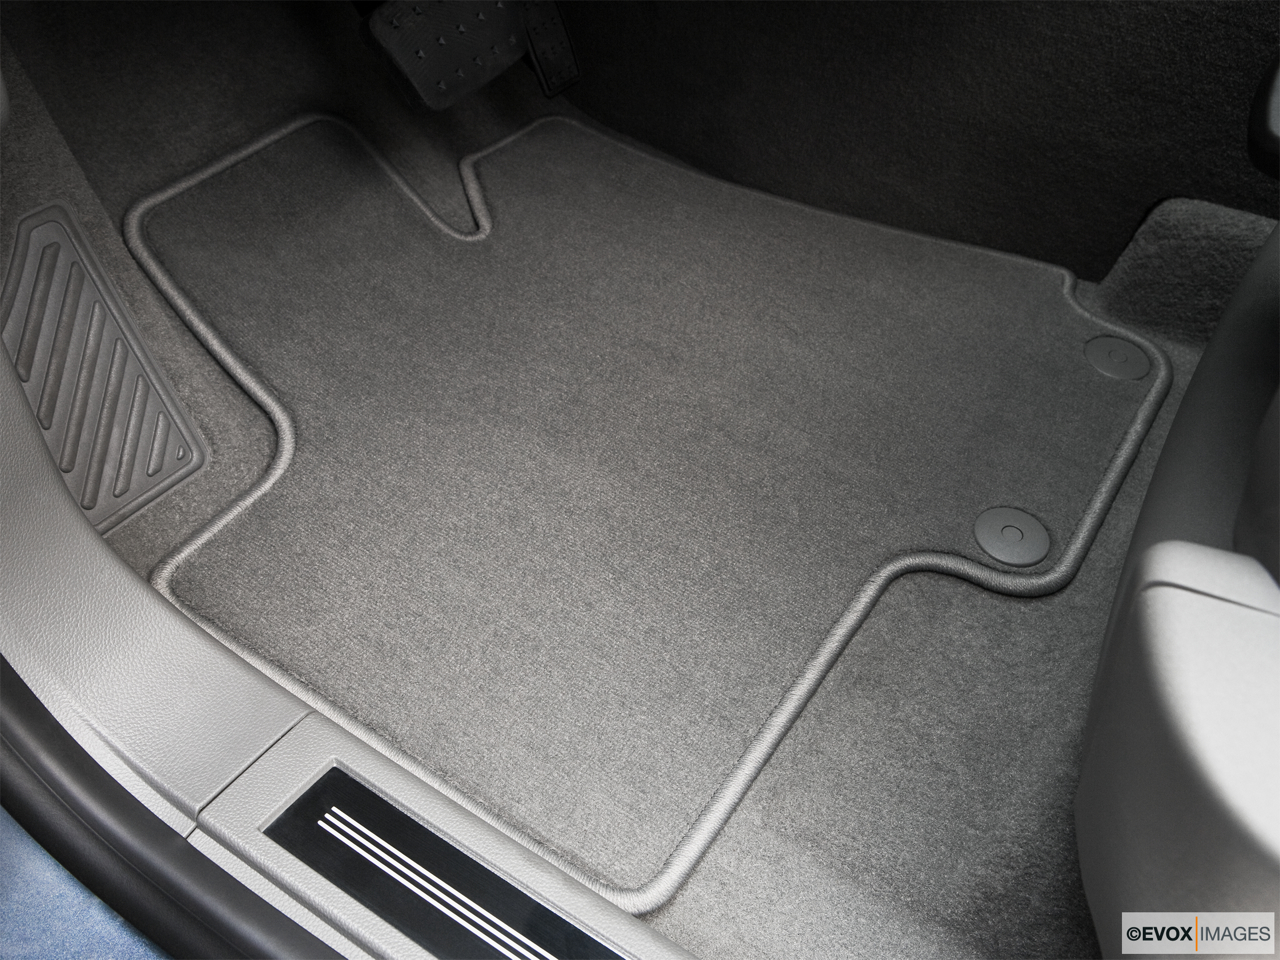 2010 Cadillac SRX Crossover Premium Collection Driver's floor mat and pedals. Mid-seat level from outside looking in. 